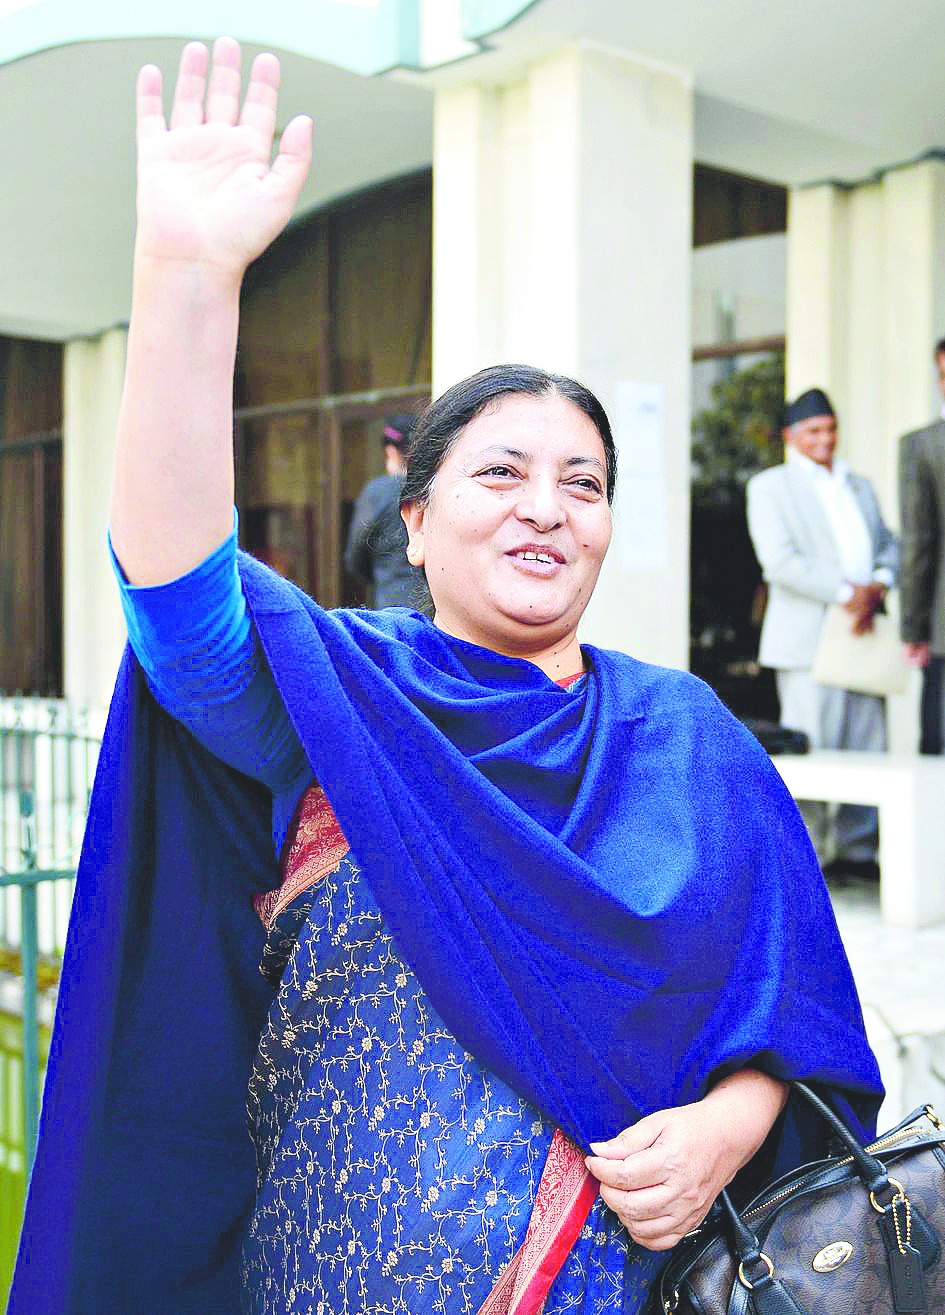 Nepal elects first woman President - Telegraph India